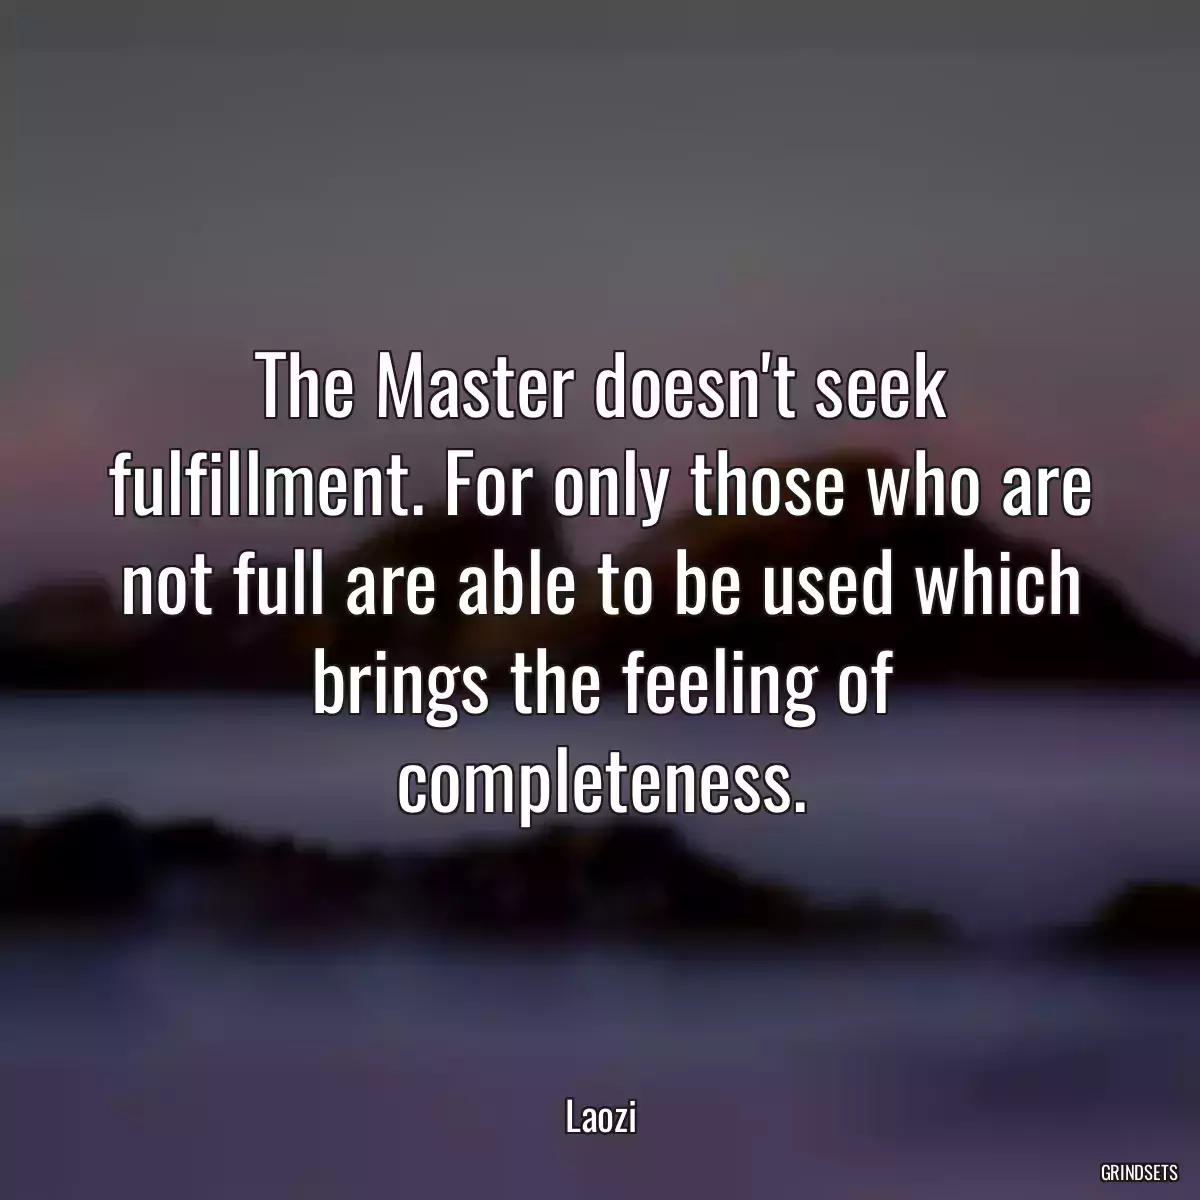 The Master doesn\'t seek fulfillment. For only those who are not full are able to be used which brings the feeling of completeness.